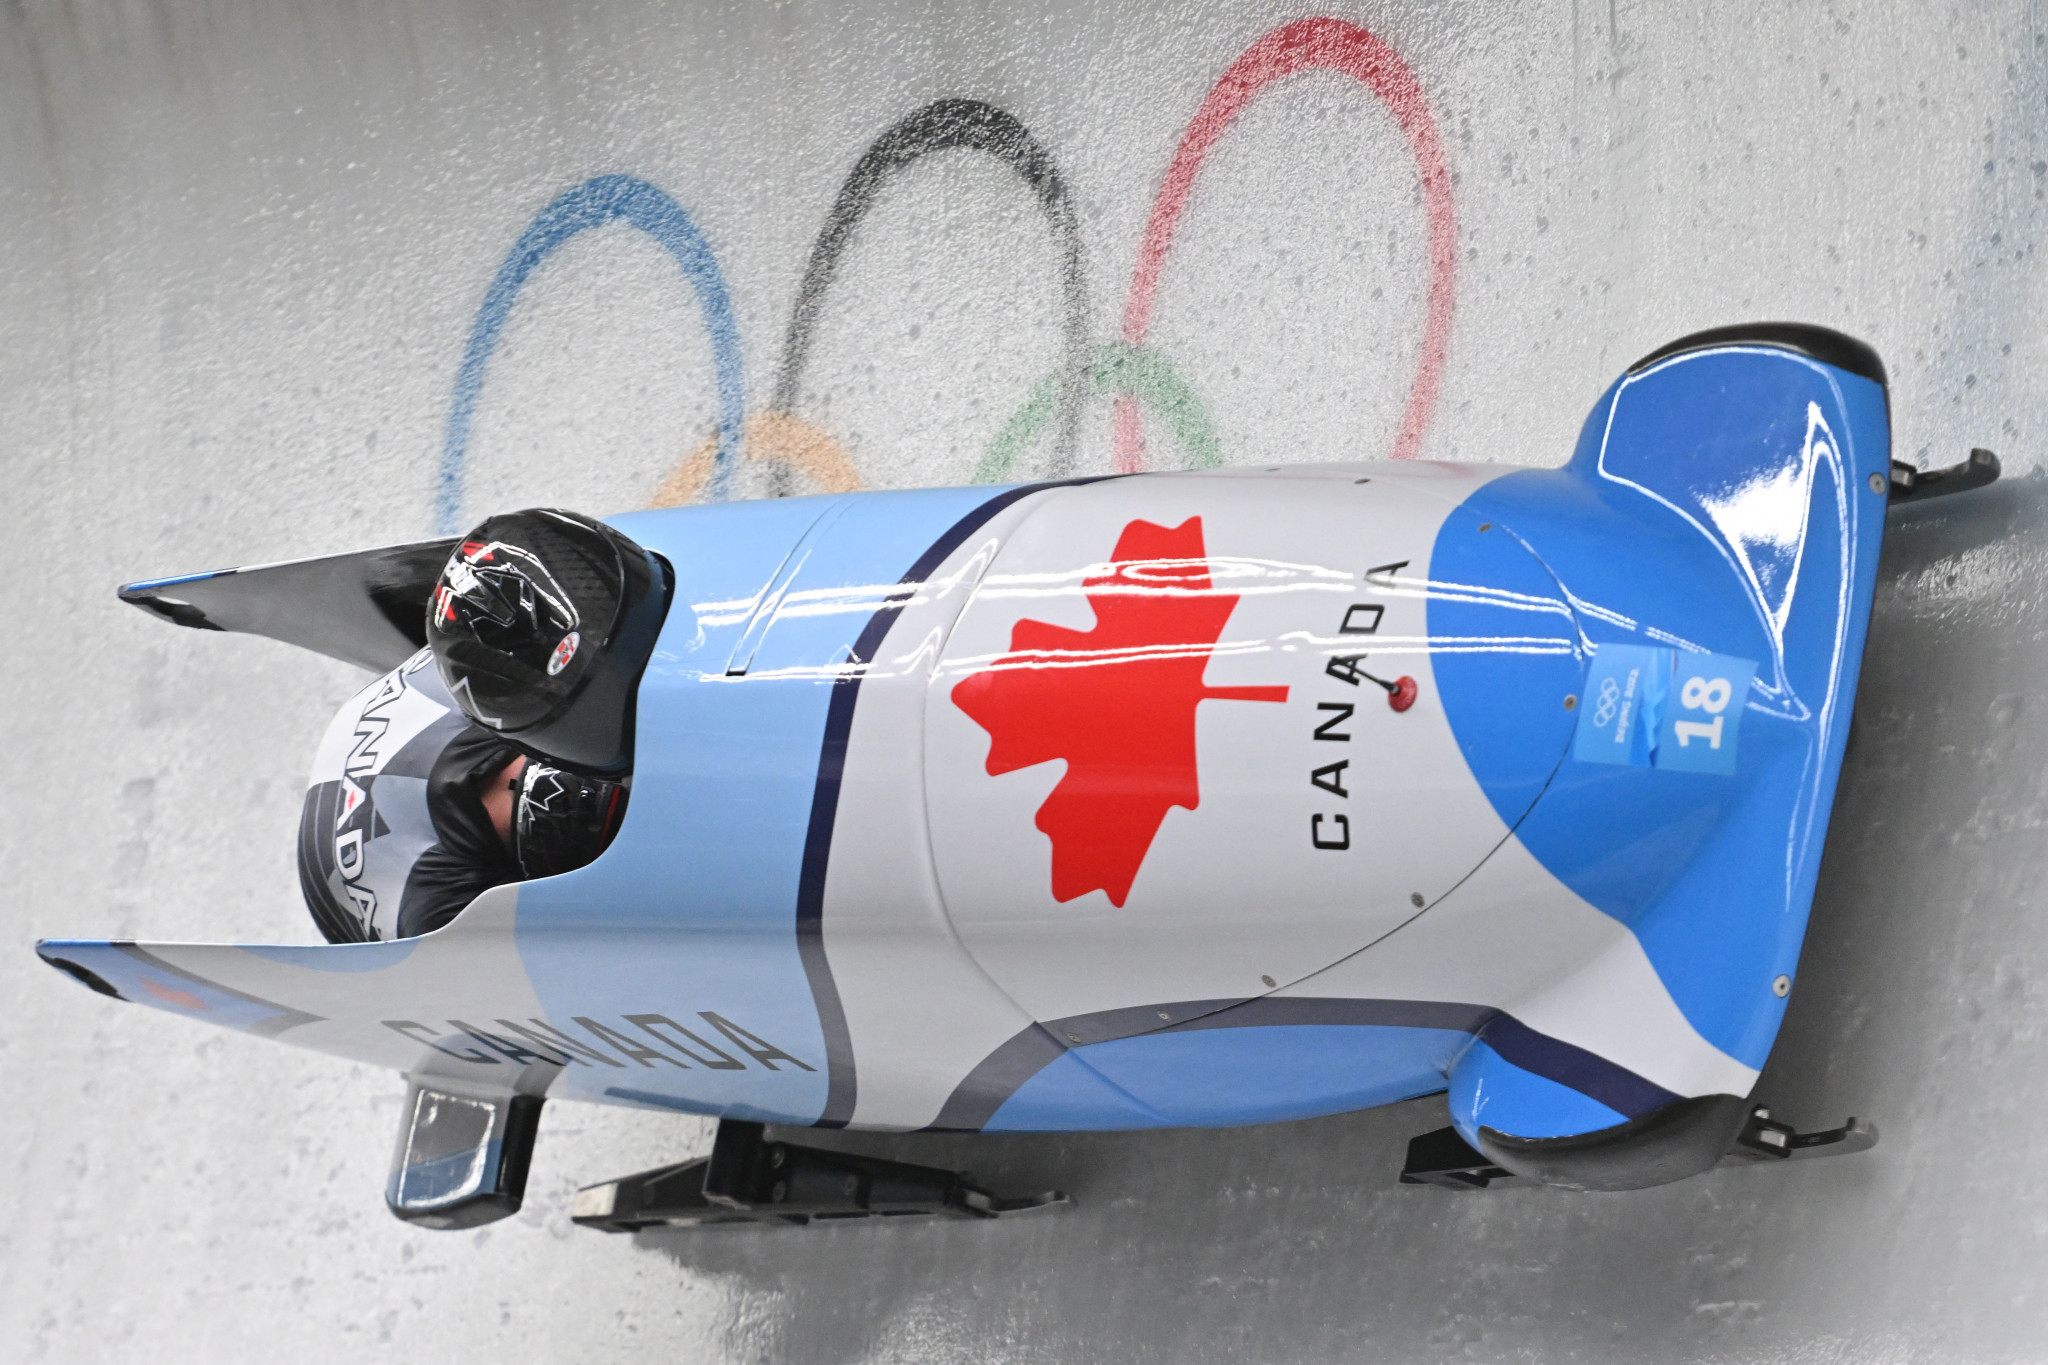 Bobsleigh Canada Skeleton is among several organisations that have been hit by safeguarding scandals ©Getty Images